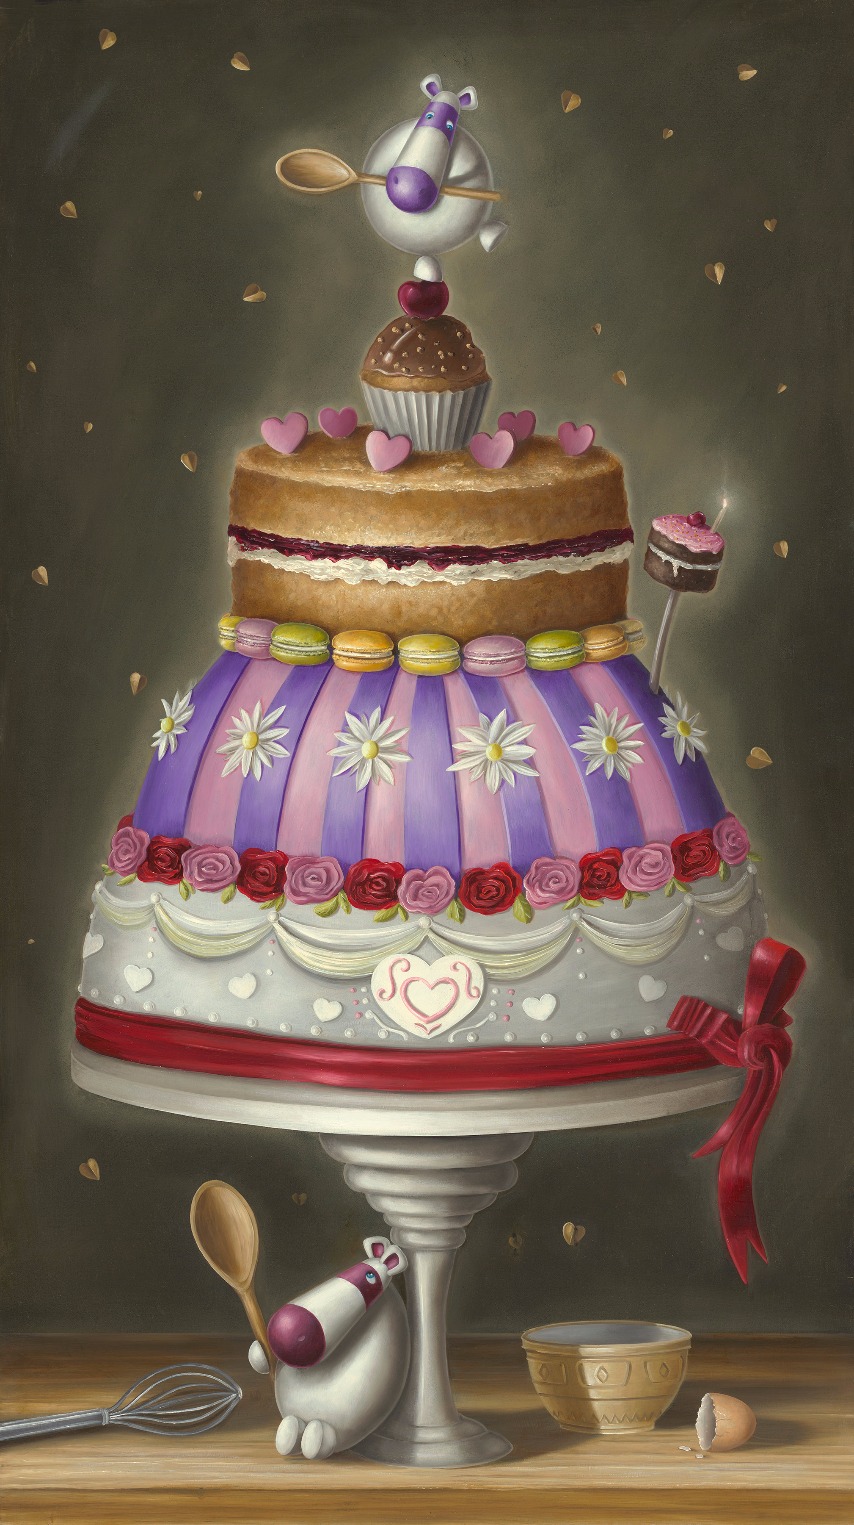 Bake Off by Peter Smith